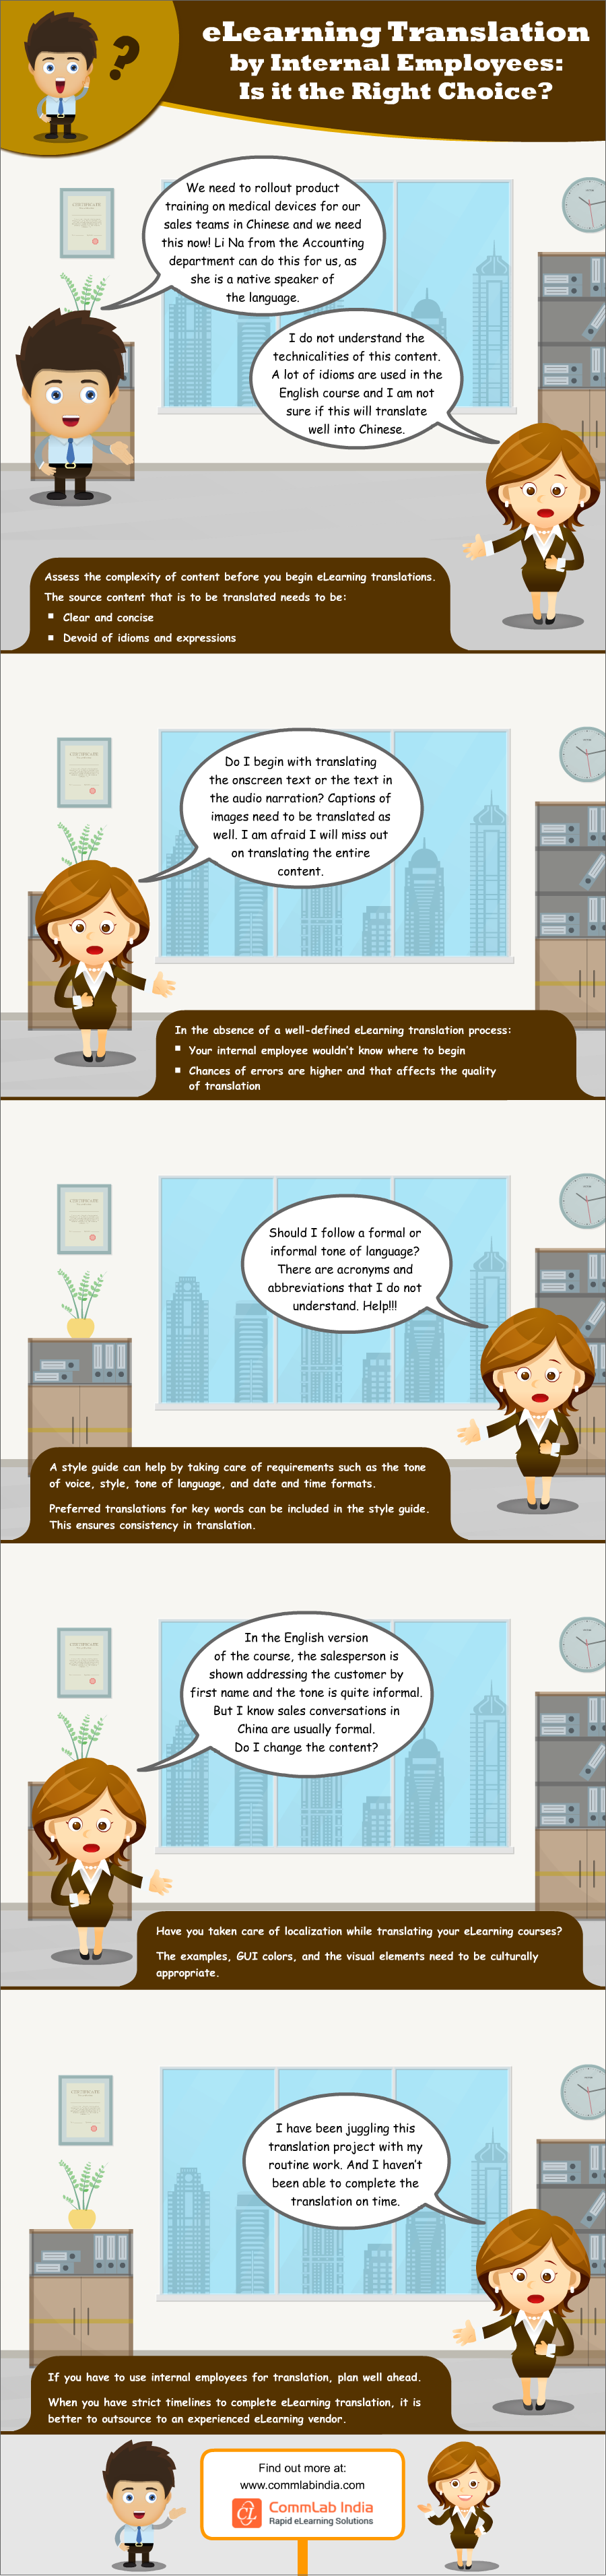 eLearning Translation by Internal Employees: Is it the Right Choice? [Infographic]